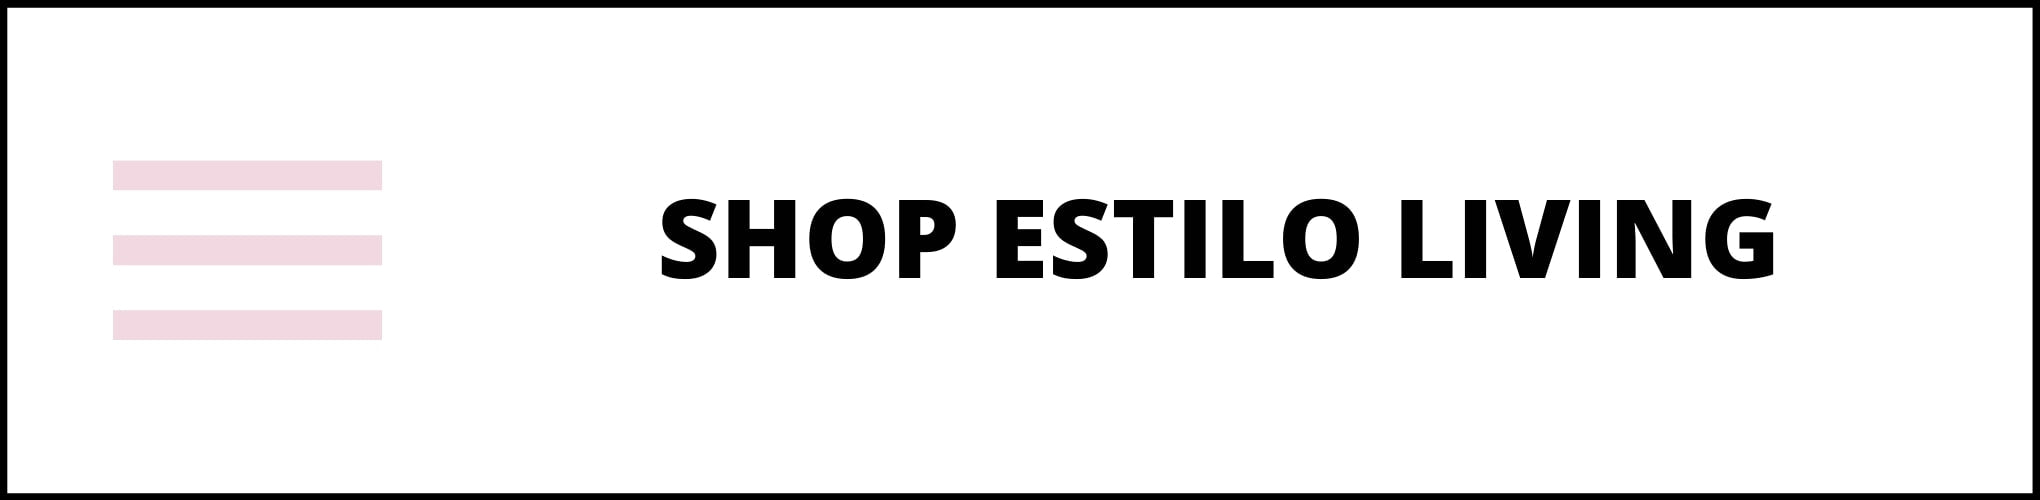 Shop Estilo Living - Small Home Decor, Storage Solutions, Space Savers & Pet Accessories for Apartments and Tiny Homes Online!